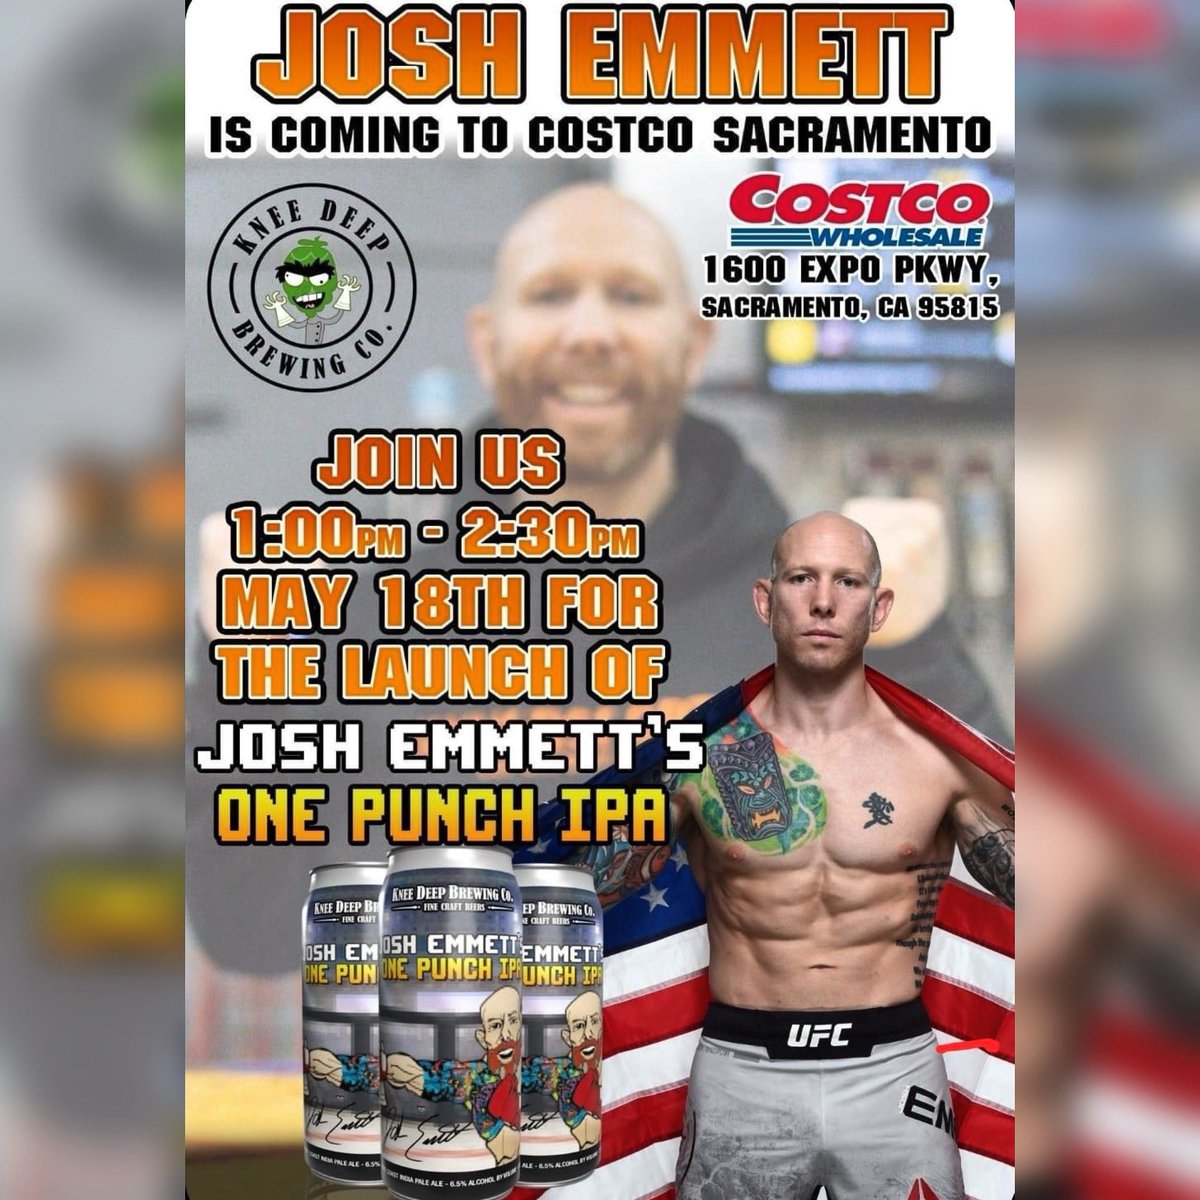 Next Saturday I’ll be at Costco Sacramento doing a meet & greet from 1:00-2:30pm. Swing by, say hi and take a case of One Punch IPA home! 🍻👊🏼 #joshemmett #onepunchipa #kneedeepbrewing #craftbeer #costco #UFC